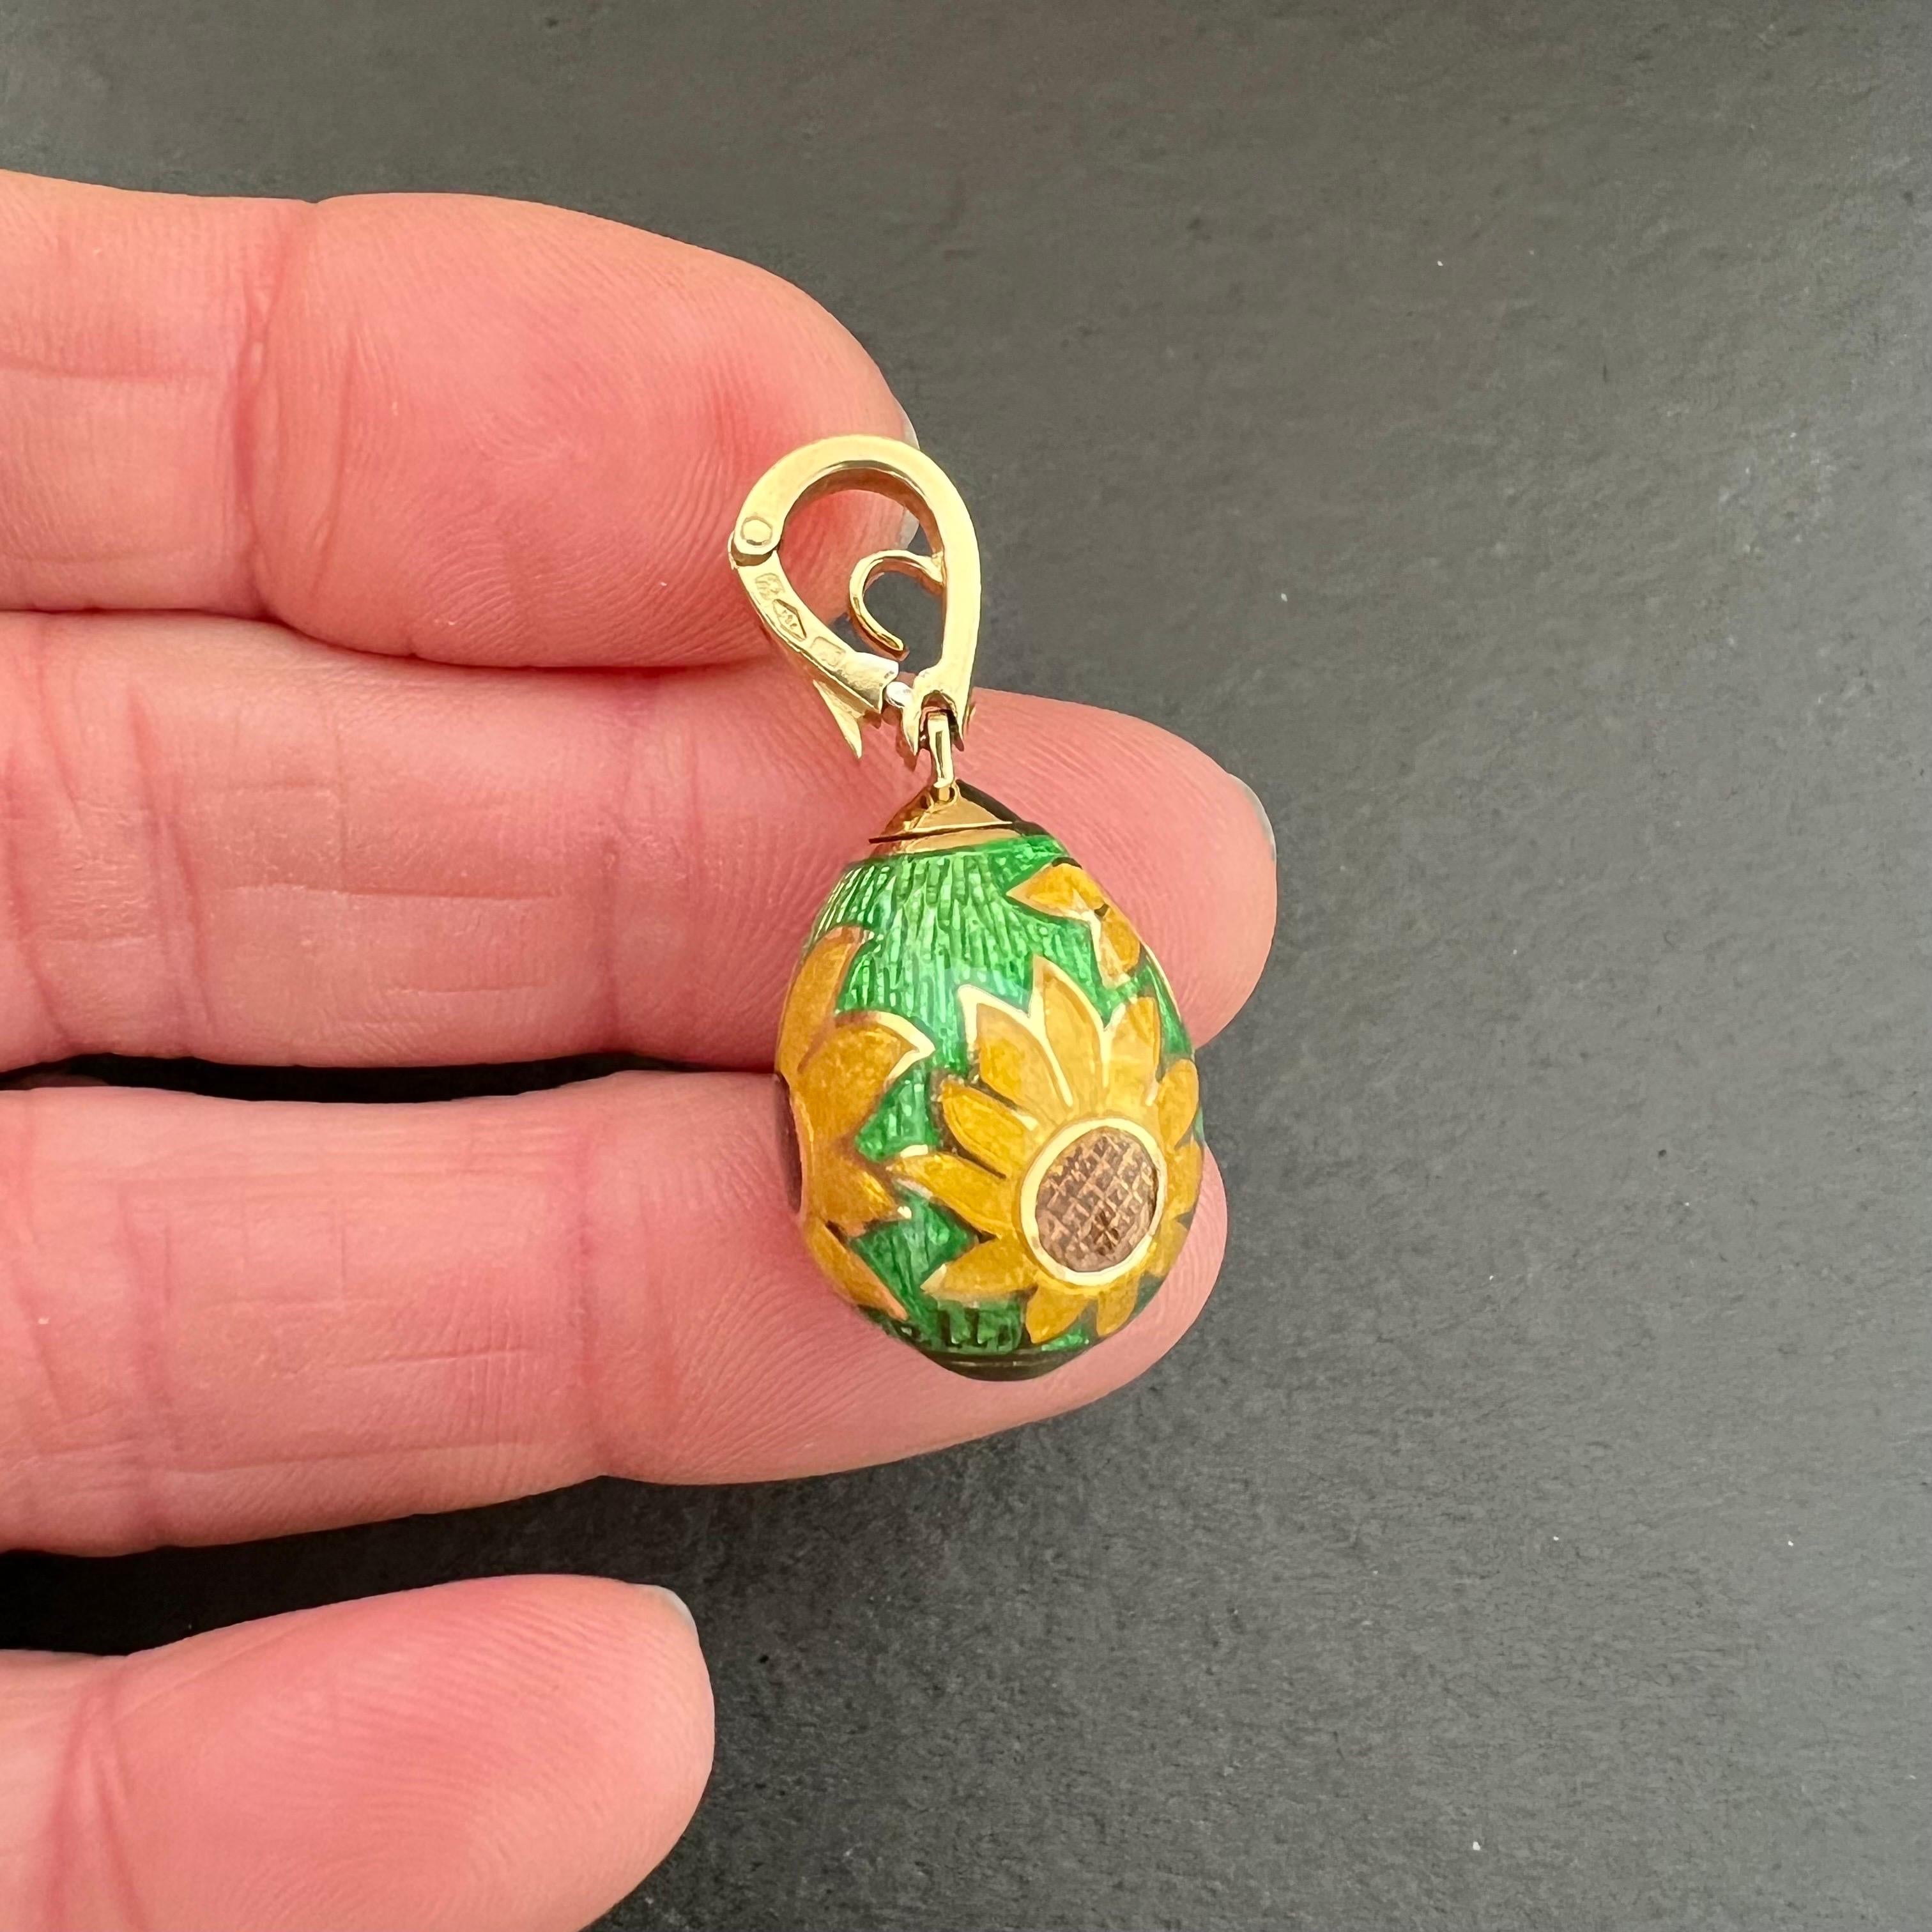 An 18 karat yellow gold Italian egg pendant designed with sunflowers and green translucent fire enamel. The pendant has one brilliant cut diamond at the bottom, which has the diamond clarity VS (very slightly included) and diamond color G (near